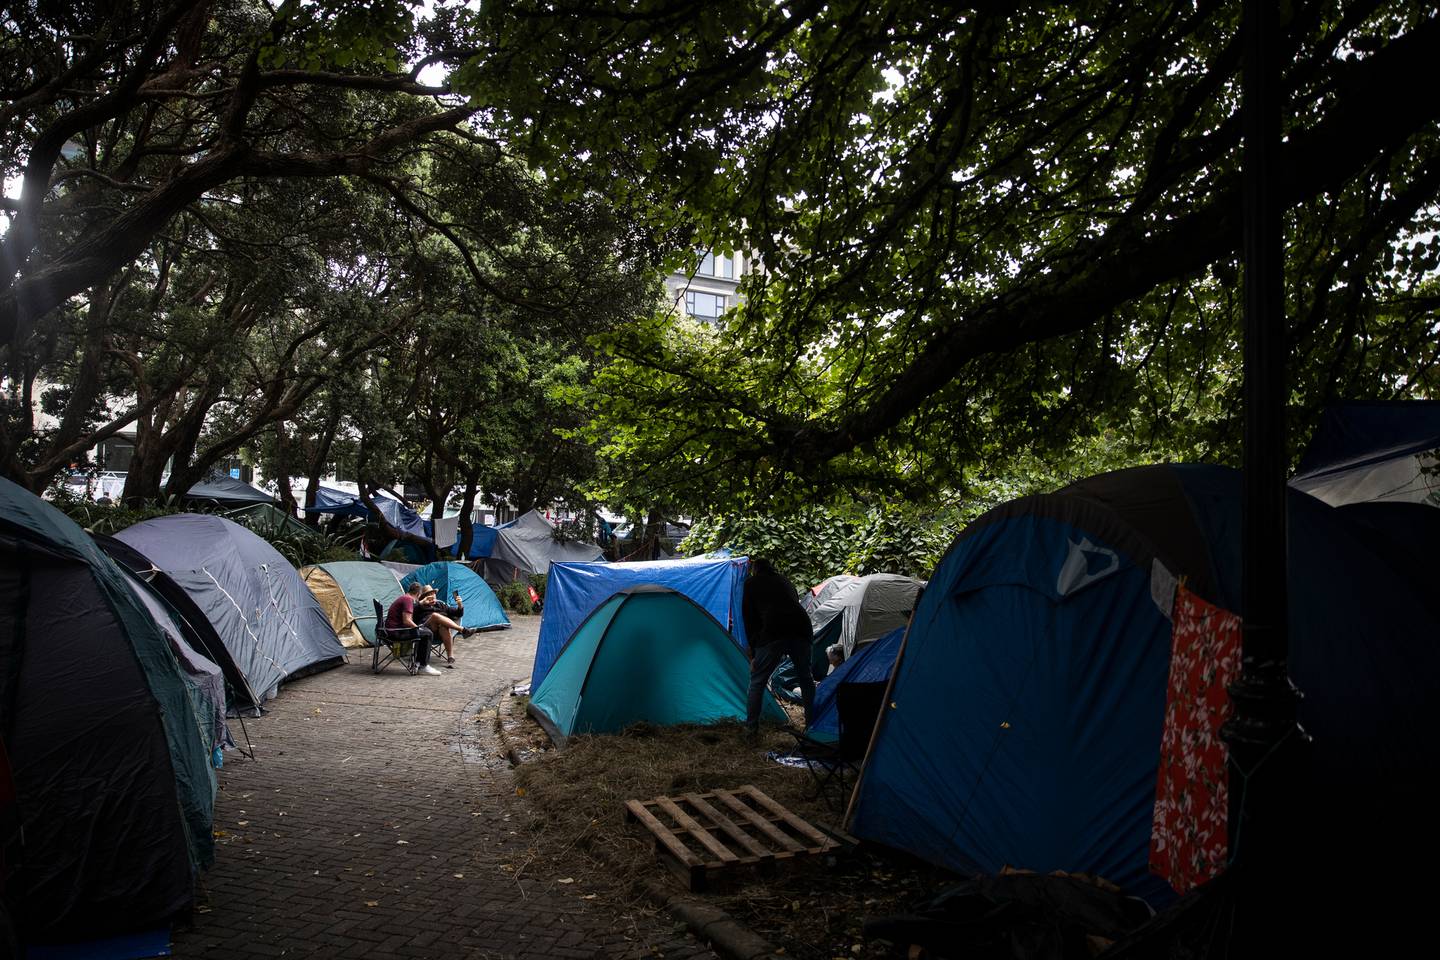 The campsite is well-established as the protest enters Day 9. Photo / George Heard